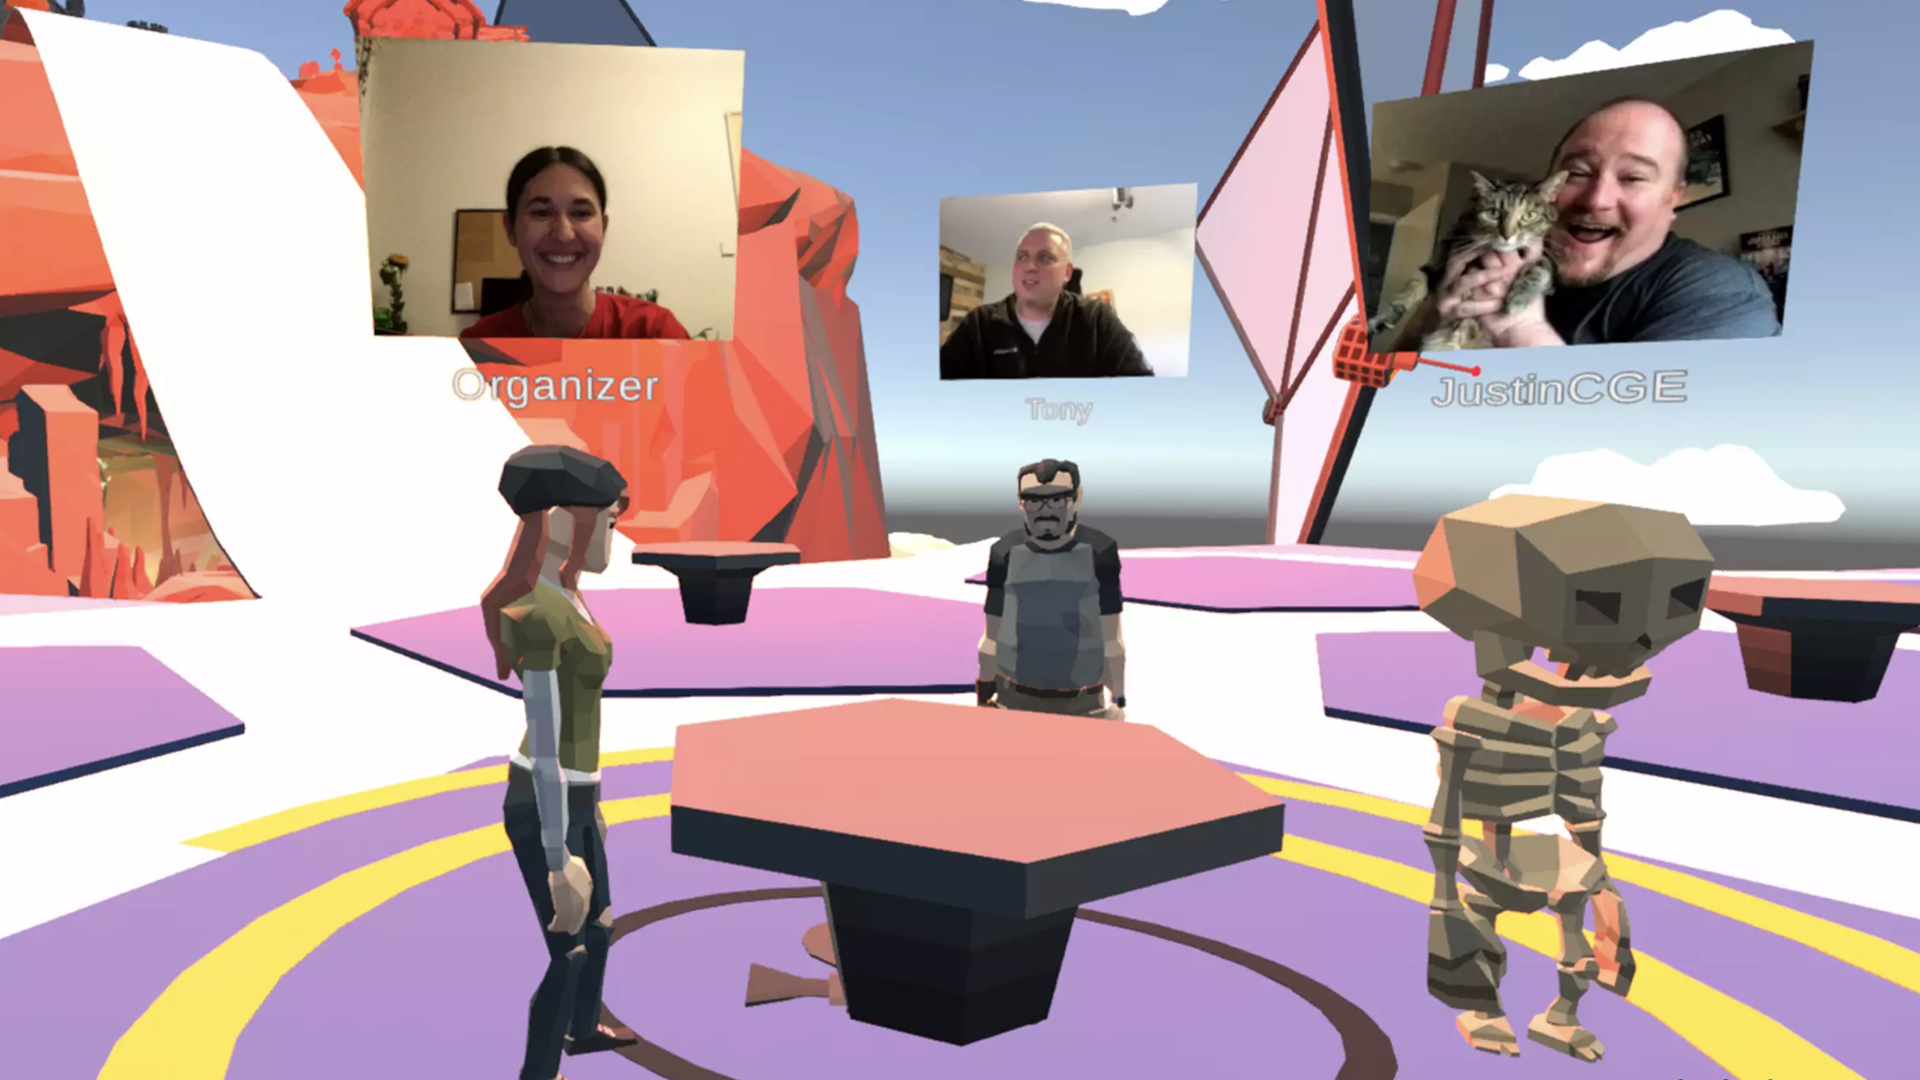 Image for Castle TriCon is an online board game convention held in a 3D virtual world